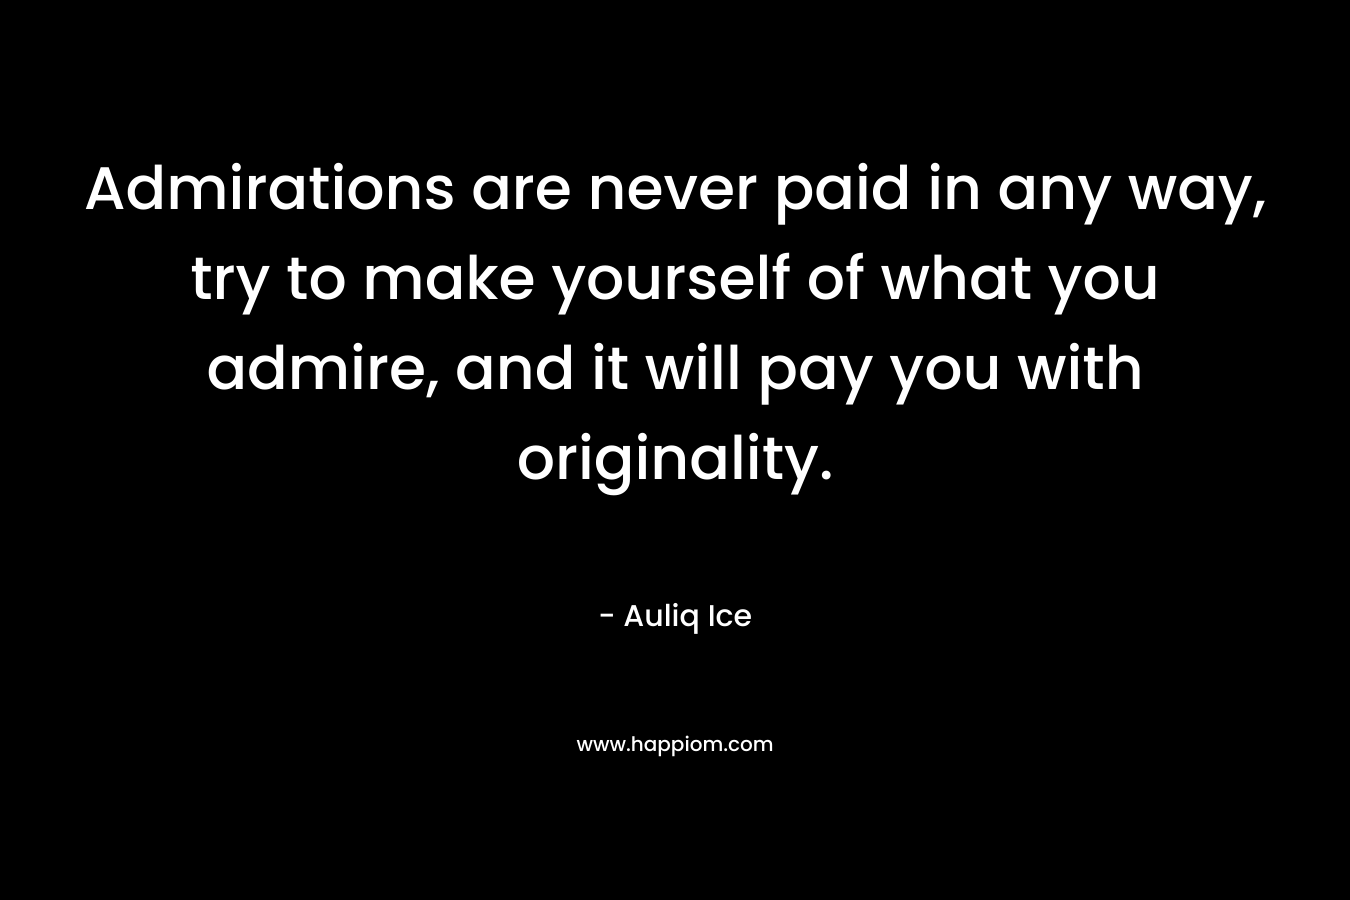 Admirations are never paid in any way, try to make yourself of what you admire, and it will pay you with originality. – Auliq Ice